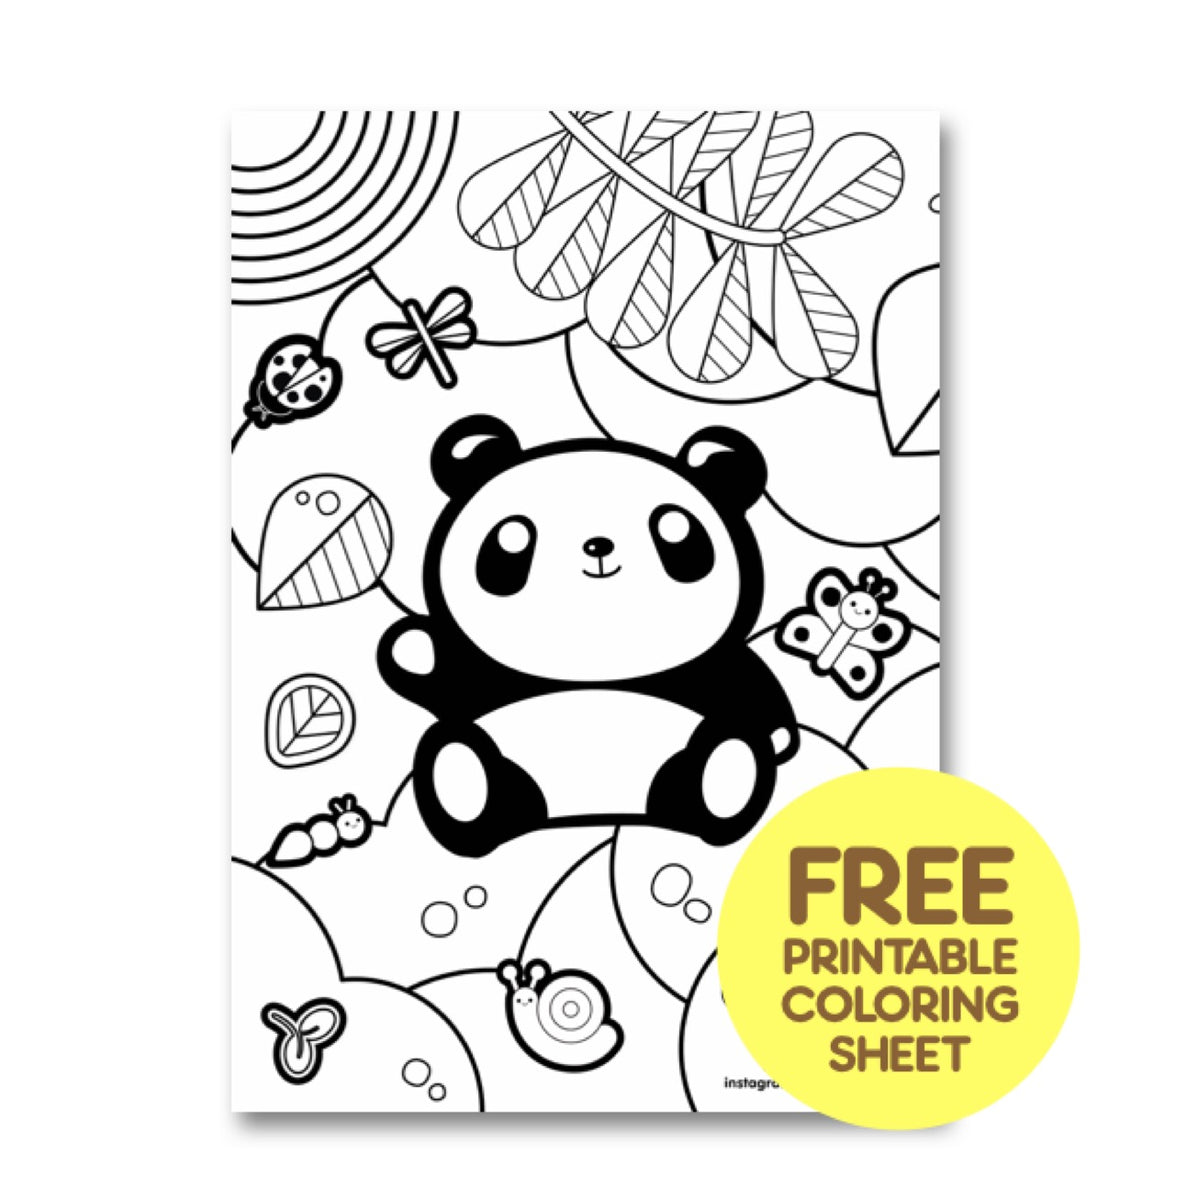 Tiny things free printable chabee the hungry panda summer art worksho â tiny buds baby naturals